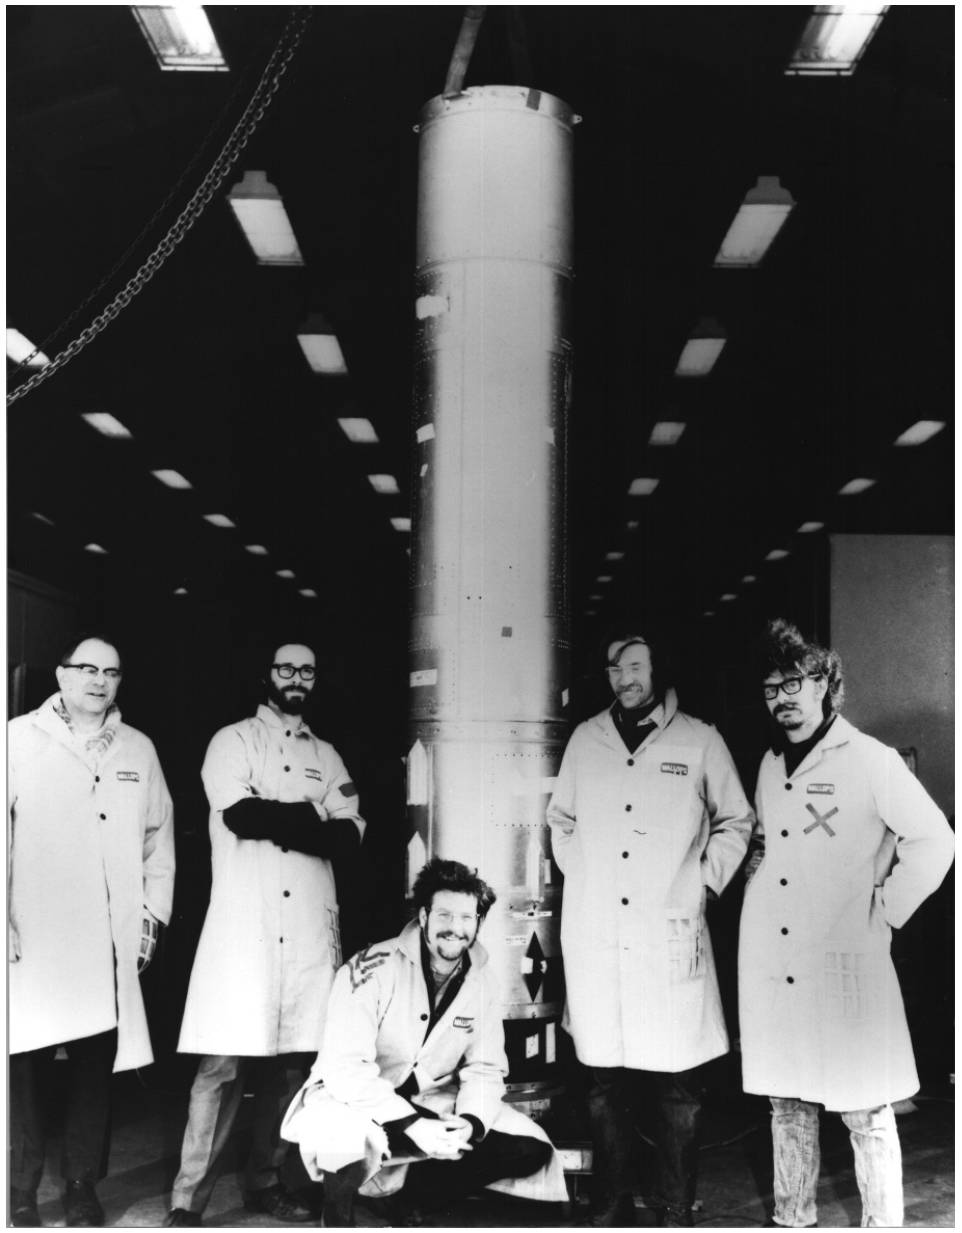 NASA’s Martin Weisskopf and colleagues from Columbia University in 1971 pose with the Aerobee-350 sounding rocket.